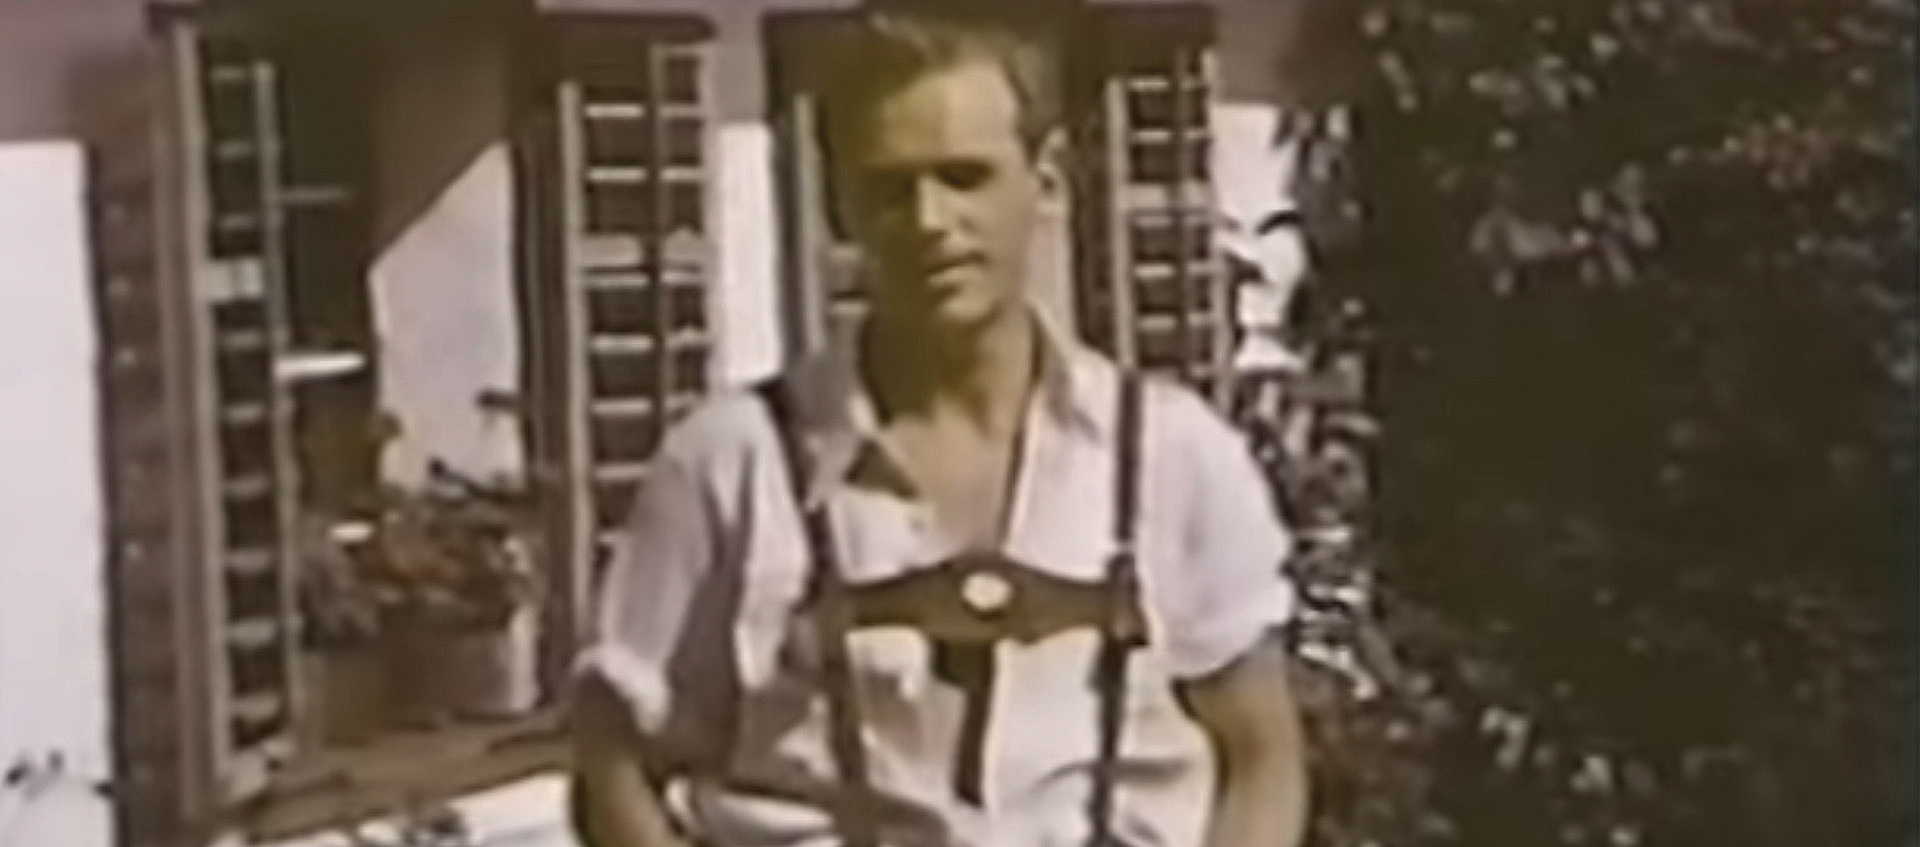 Hollywood Home Movies, image courtesy The Academy Film Archive